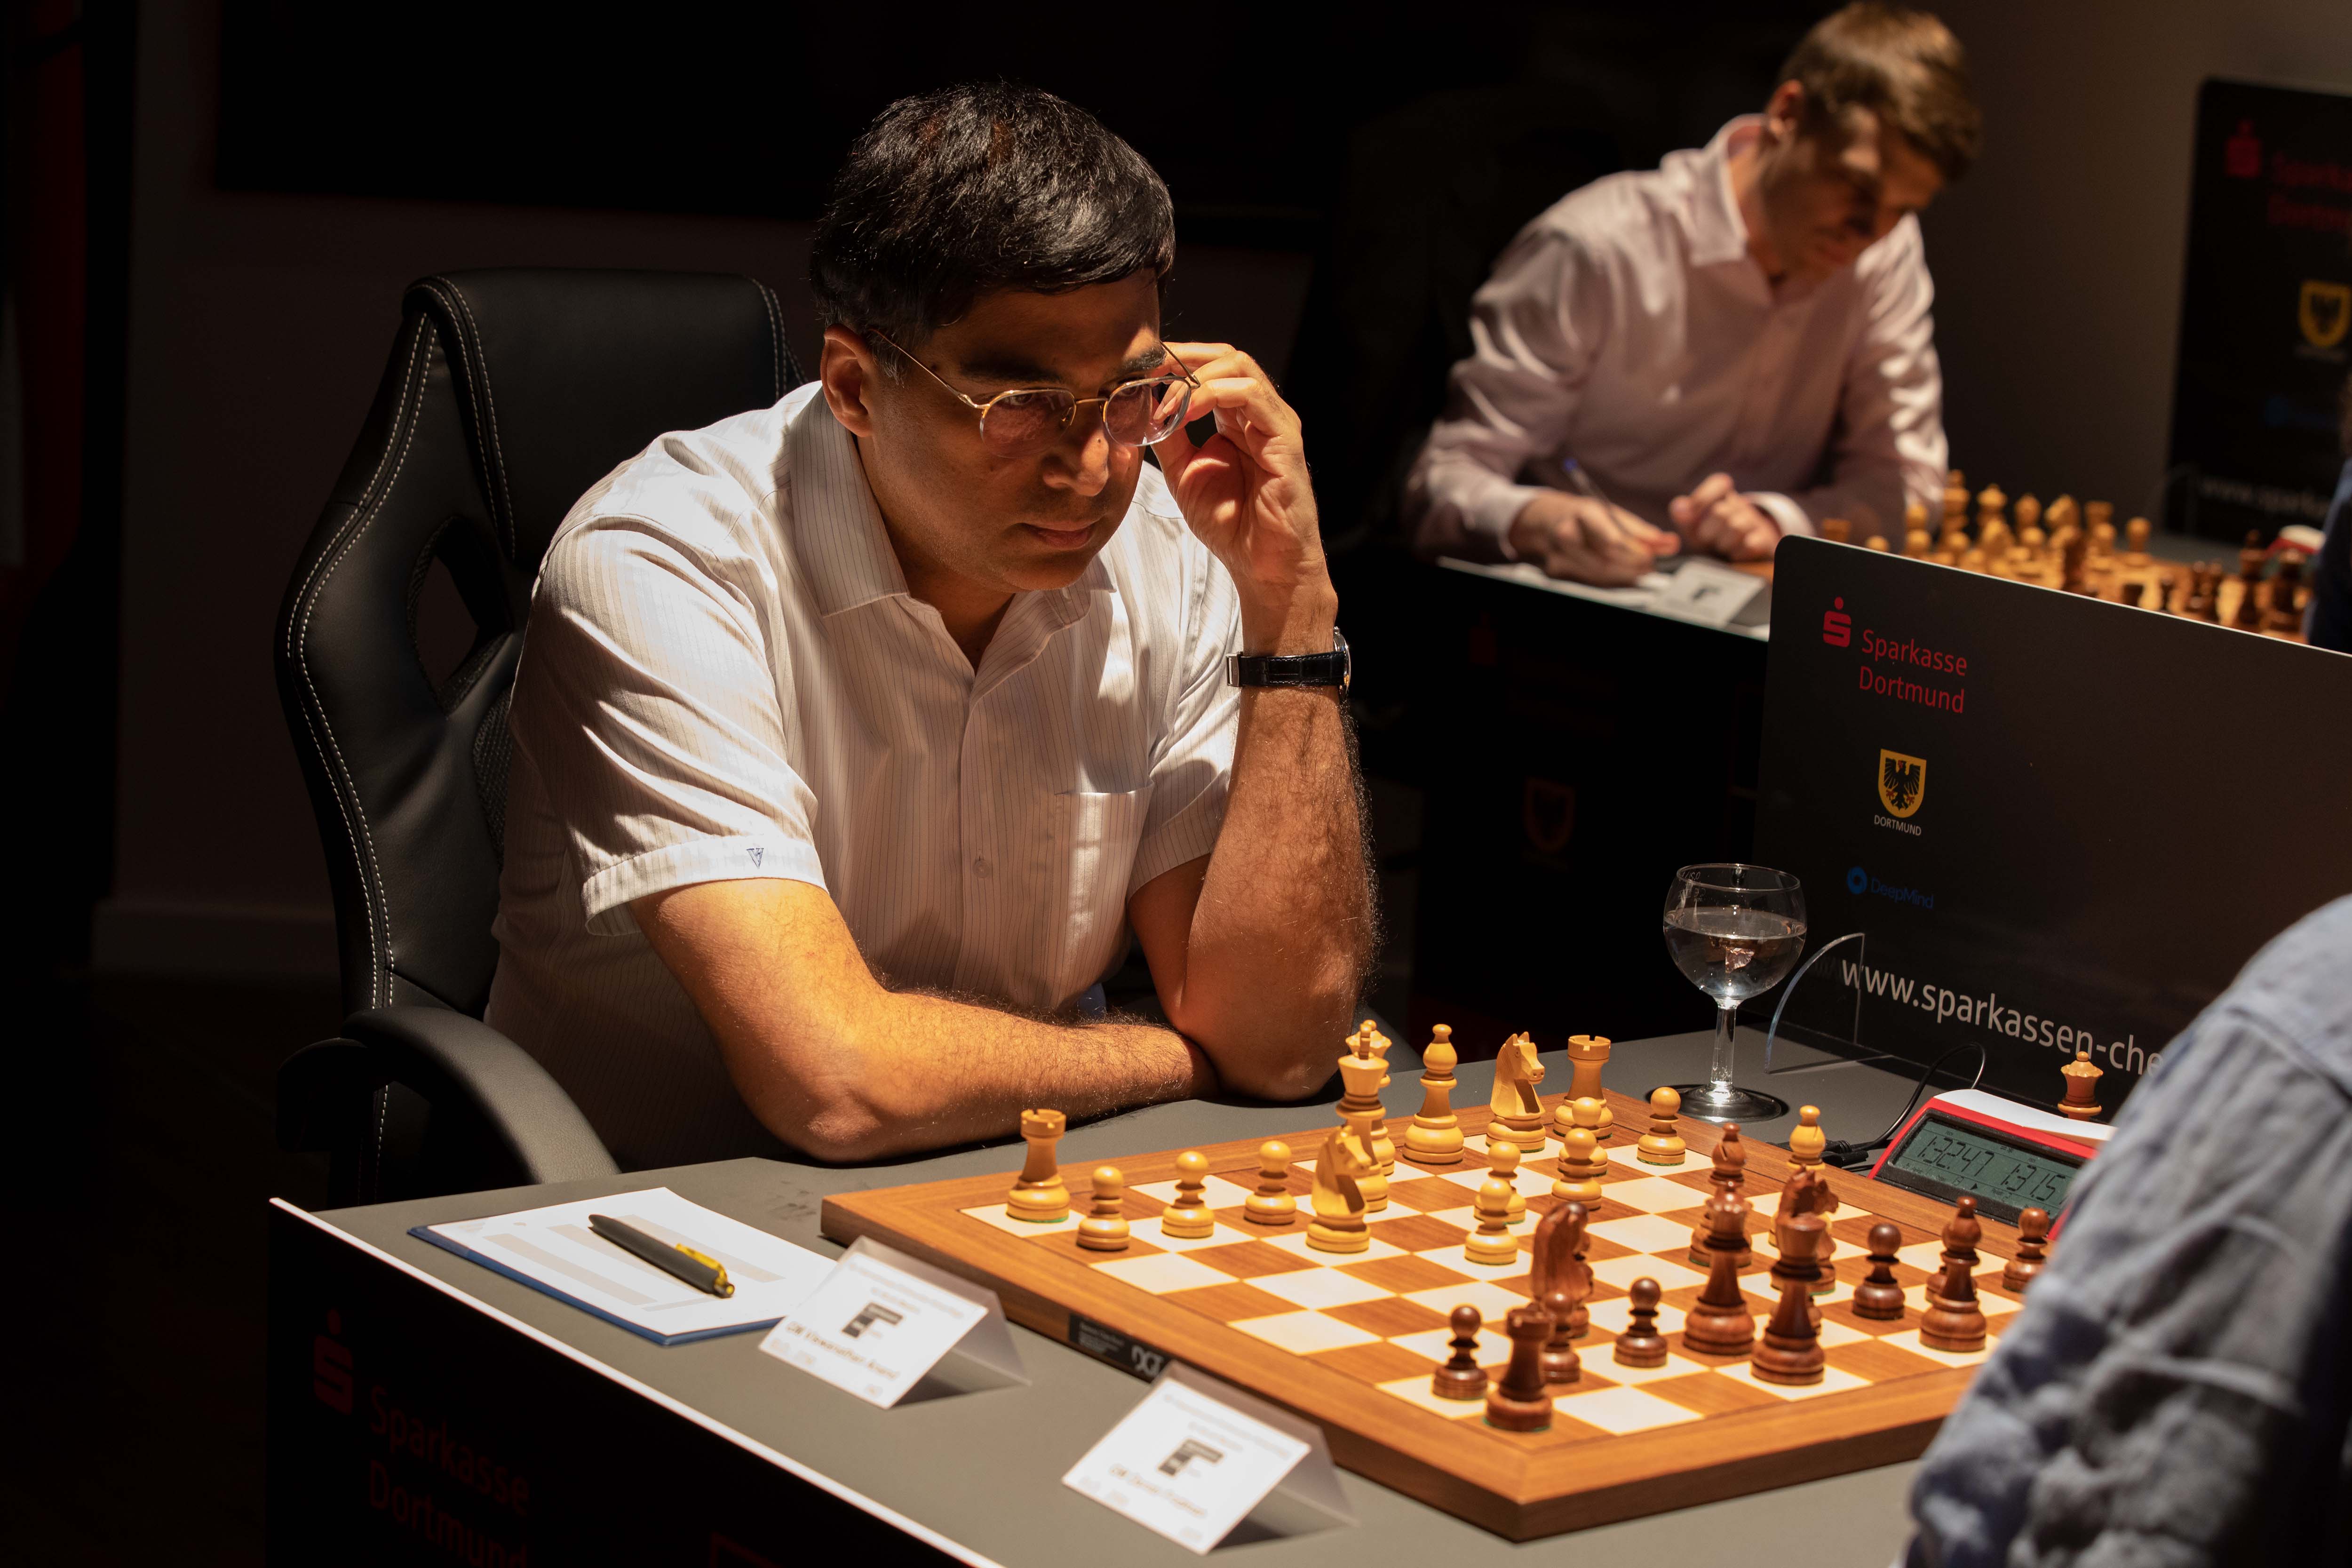 Anand with 6.Ke2!? against the Berlin Wall